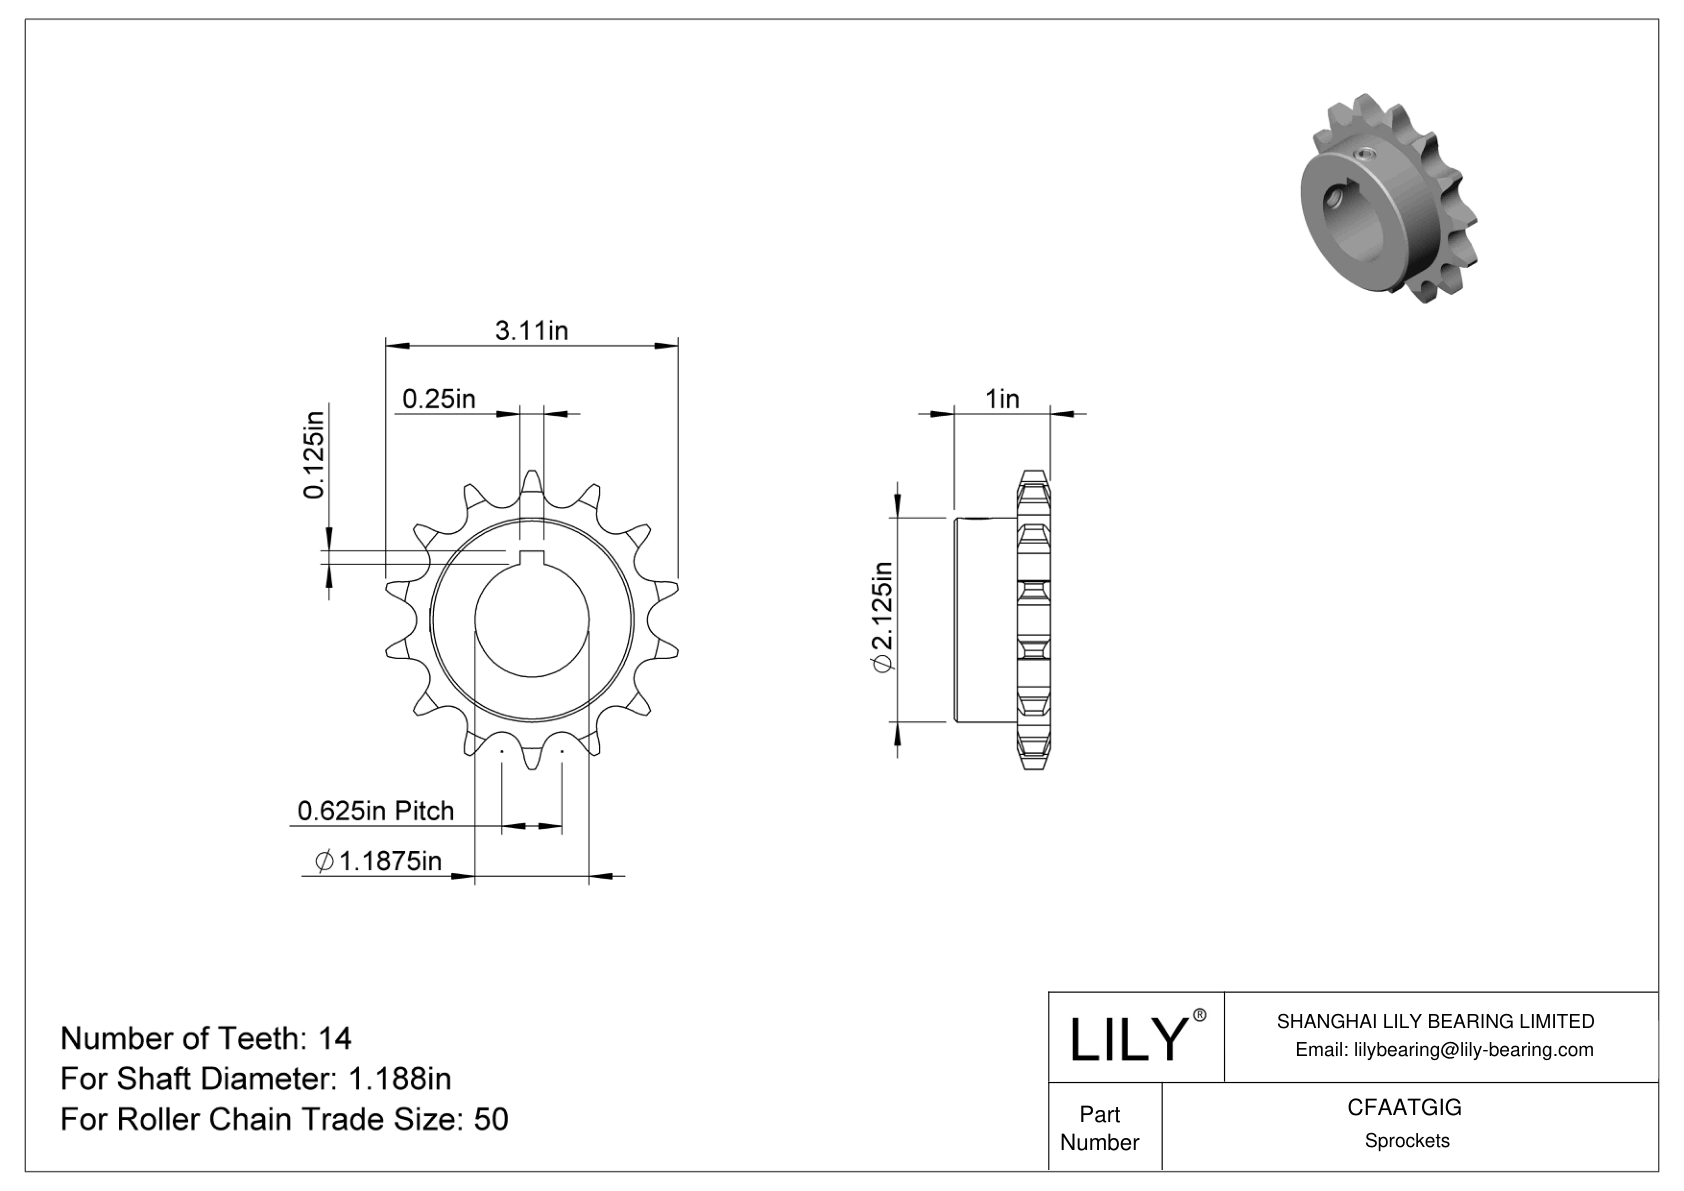 CFAATGIG Wear-Resistant Sprockets for ANSI Roller Chain cad drawing